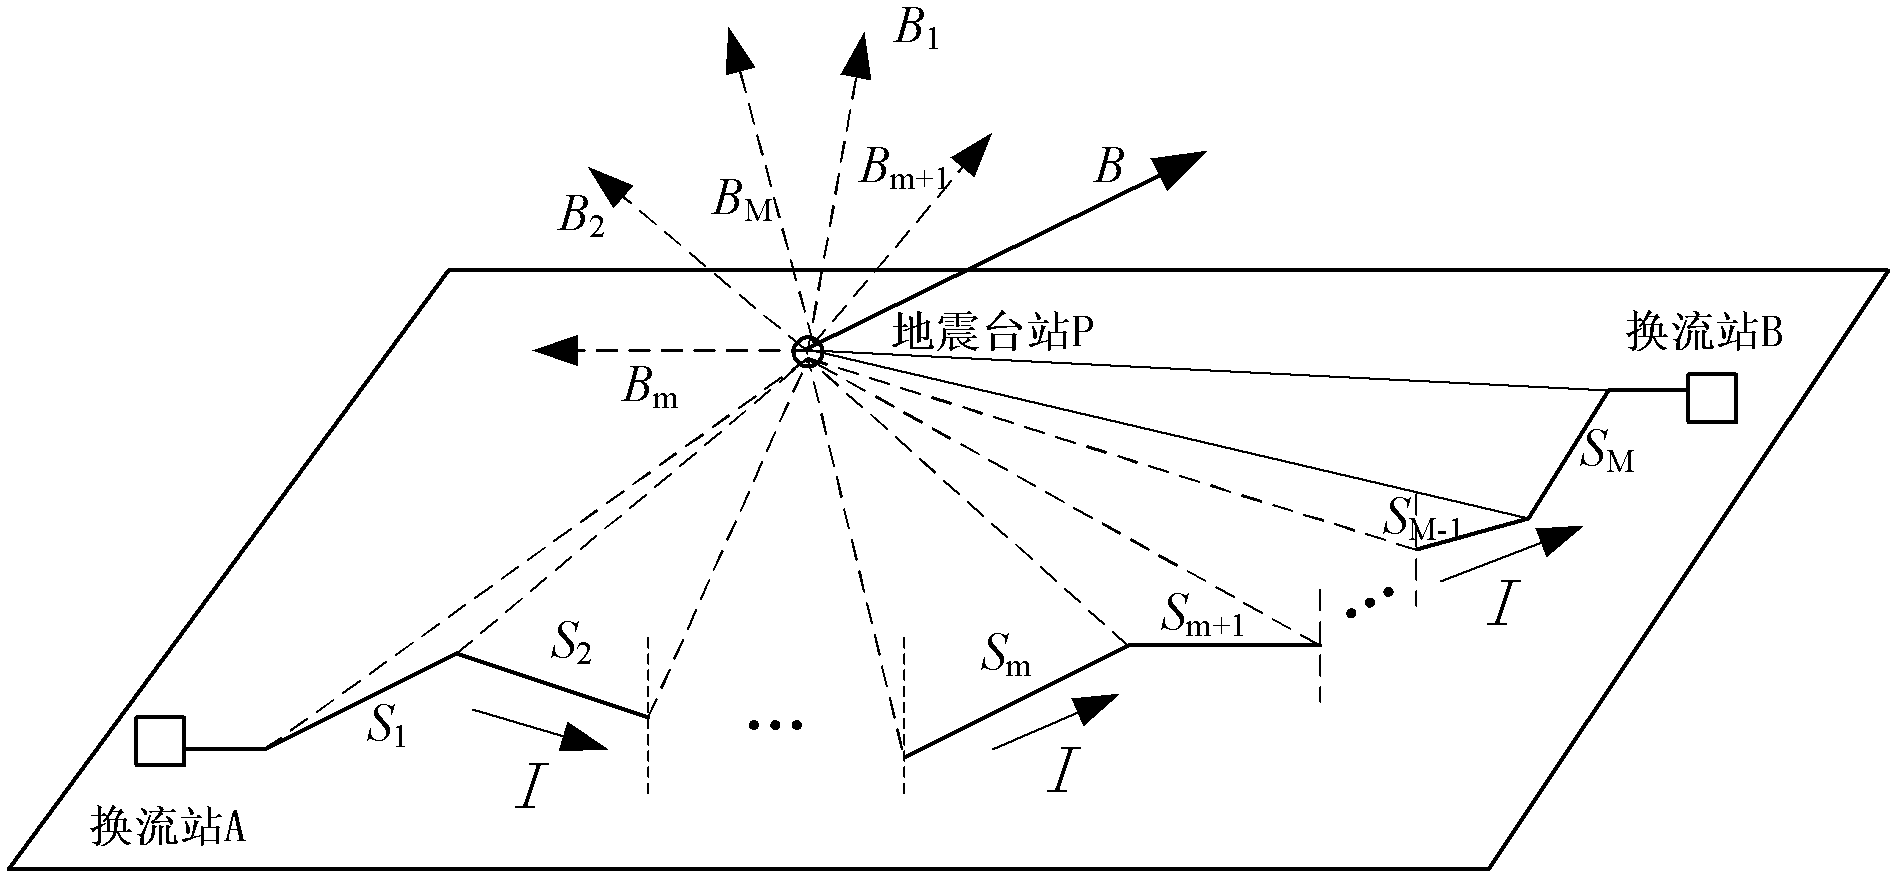 Method for determining level of interference of direct current transmission line to geomagnetic field observation